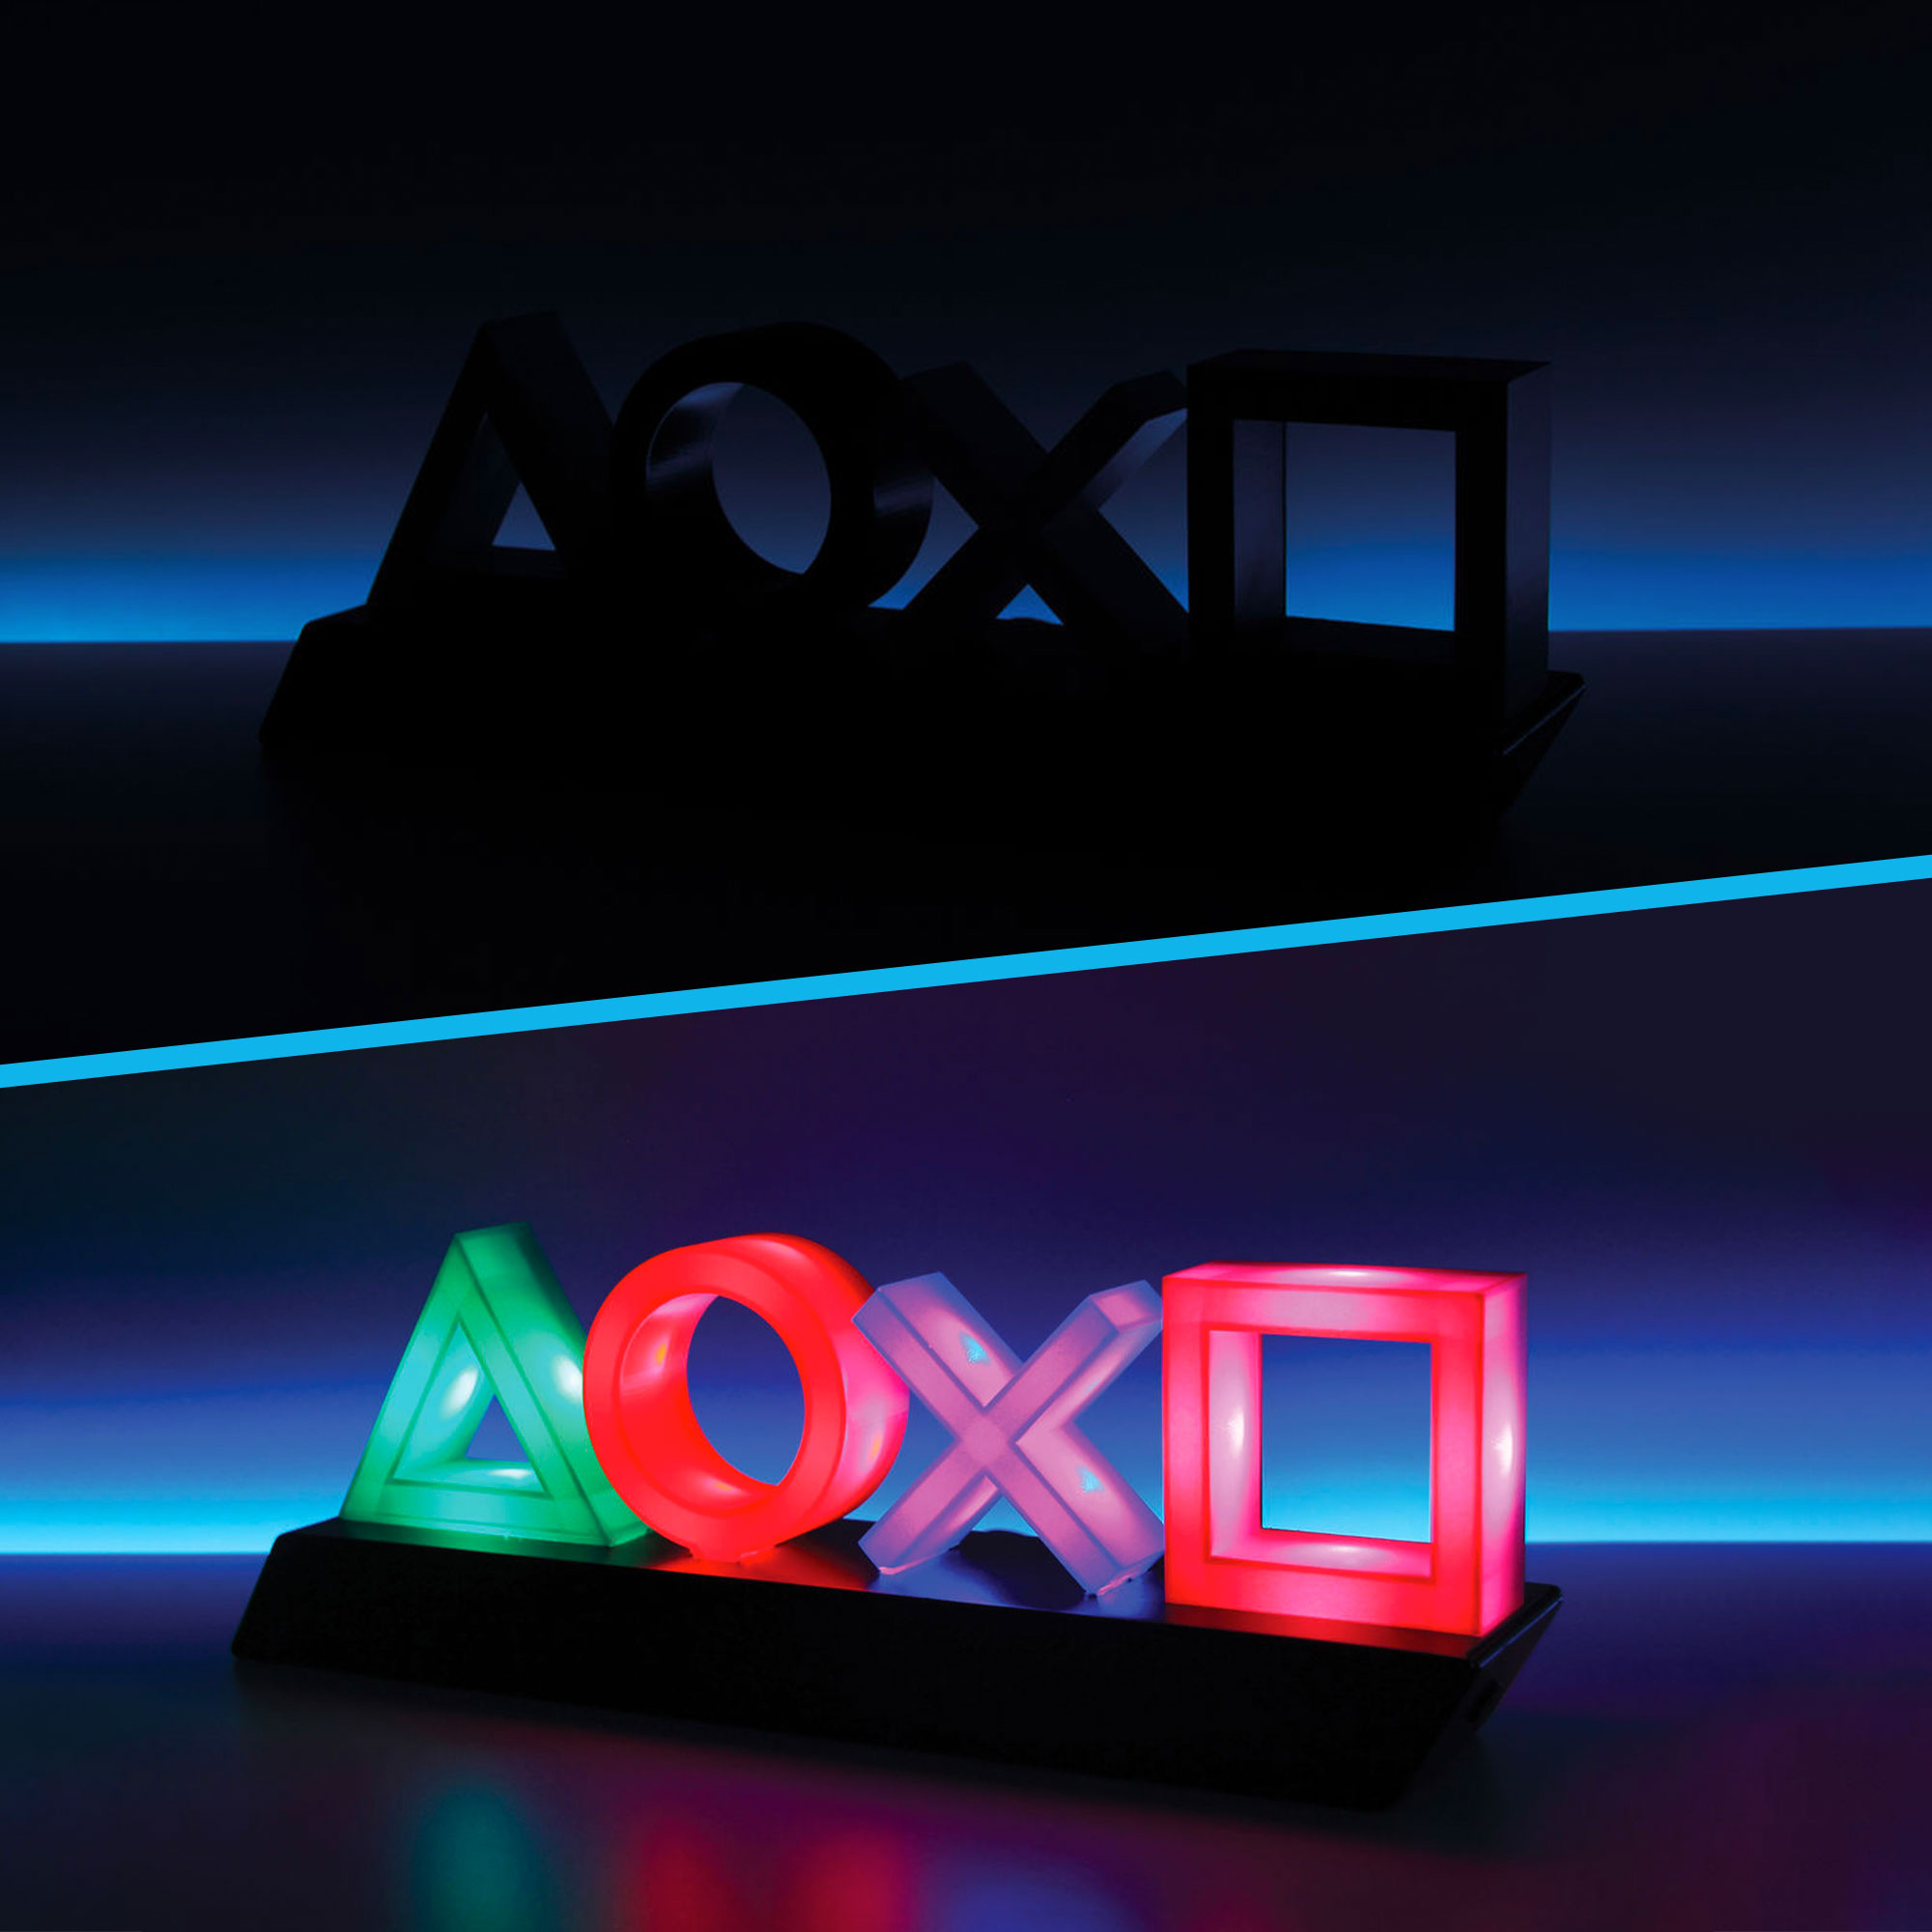 Tischlampe - PlayStation Icon Light